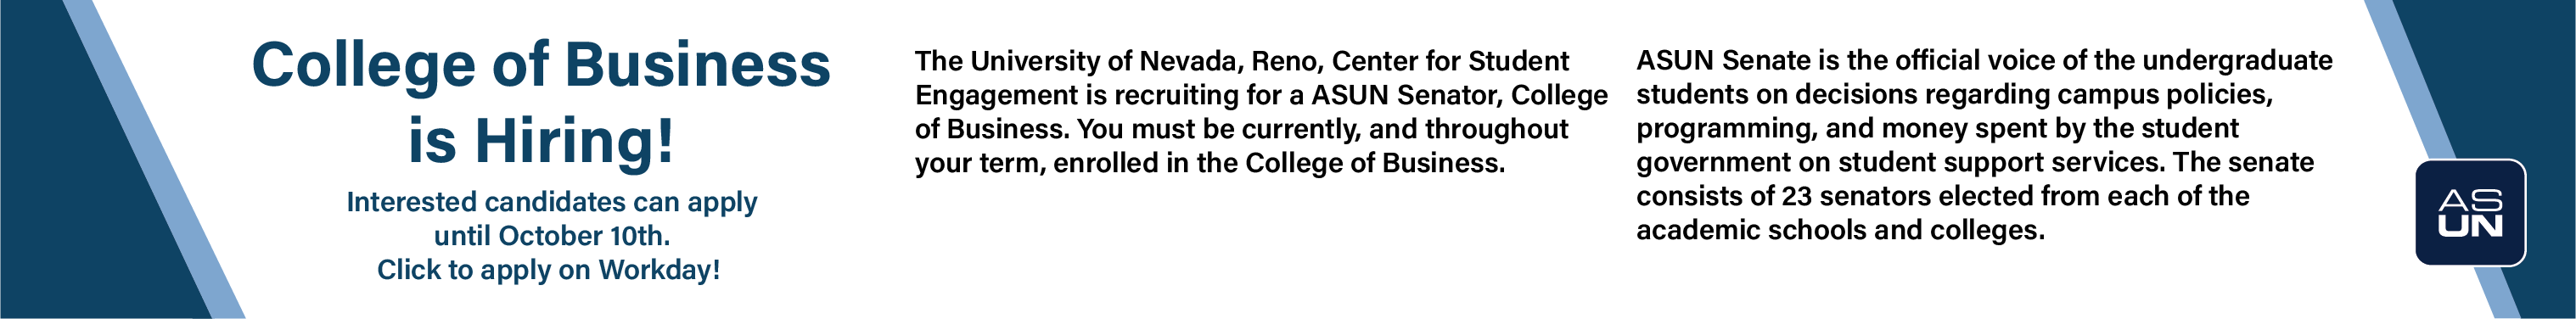 College of Business is Hiring! Interested candidates can apply until October 10th. Click to apply on Workday! The University of Nevada, Reno, Center for Student Engagement is recruiting for a ASUN Senator, College of Business. You must be currently, and throughout your term, enrolled in the College of Business. ASUN Senate is the official voice of the undergraduate students on decisions regarding campus policies, programming, and money spent by the student government on student support services. The senate consists of 23 senators elected from each of the academic schools and colleges.